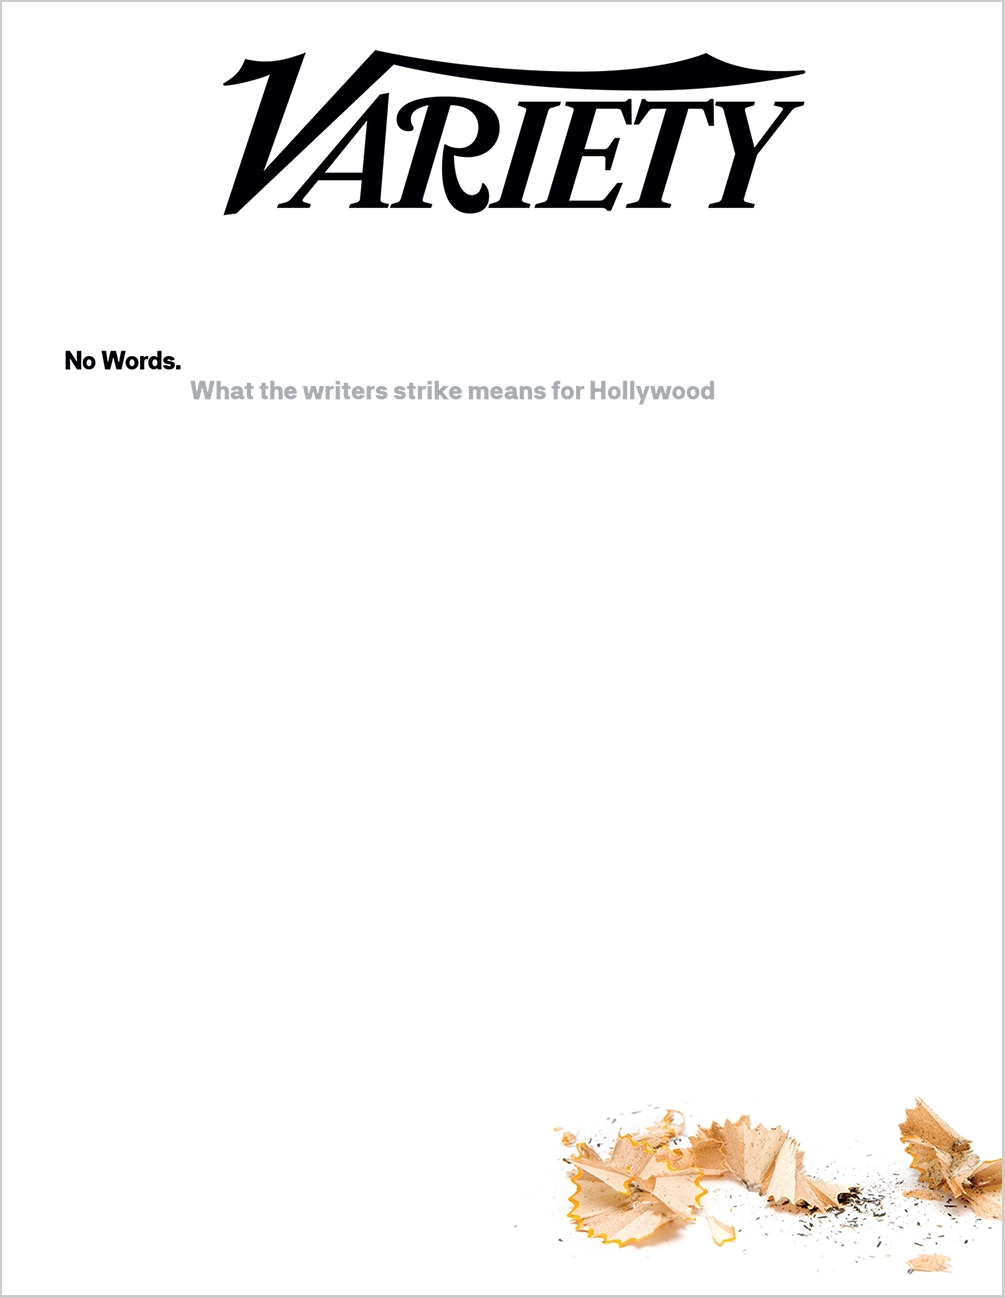 Variety Magazine Cover, blank other than nine words with pencil shavings in the bottom right corner